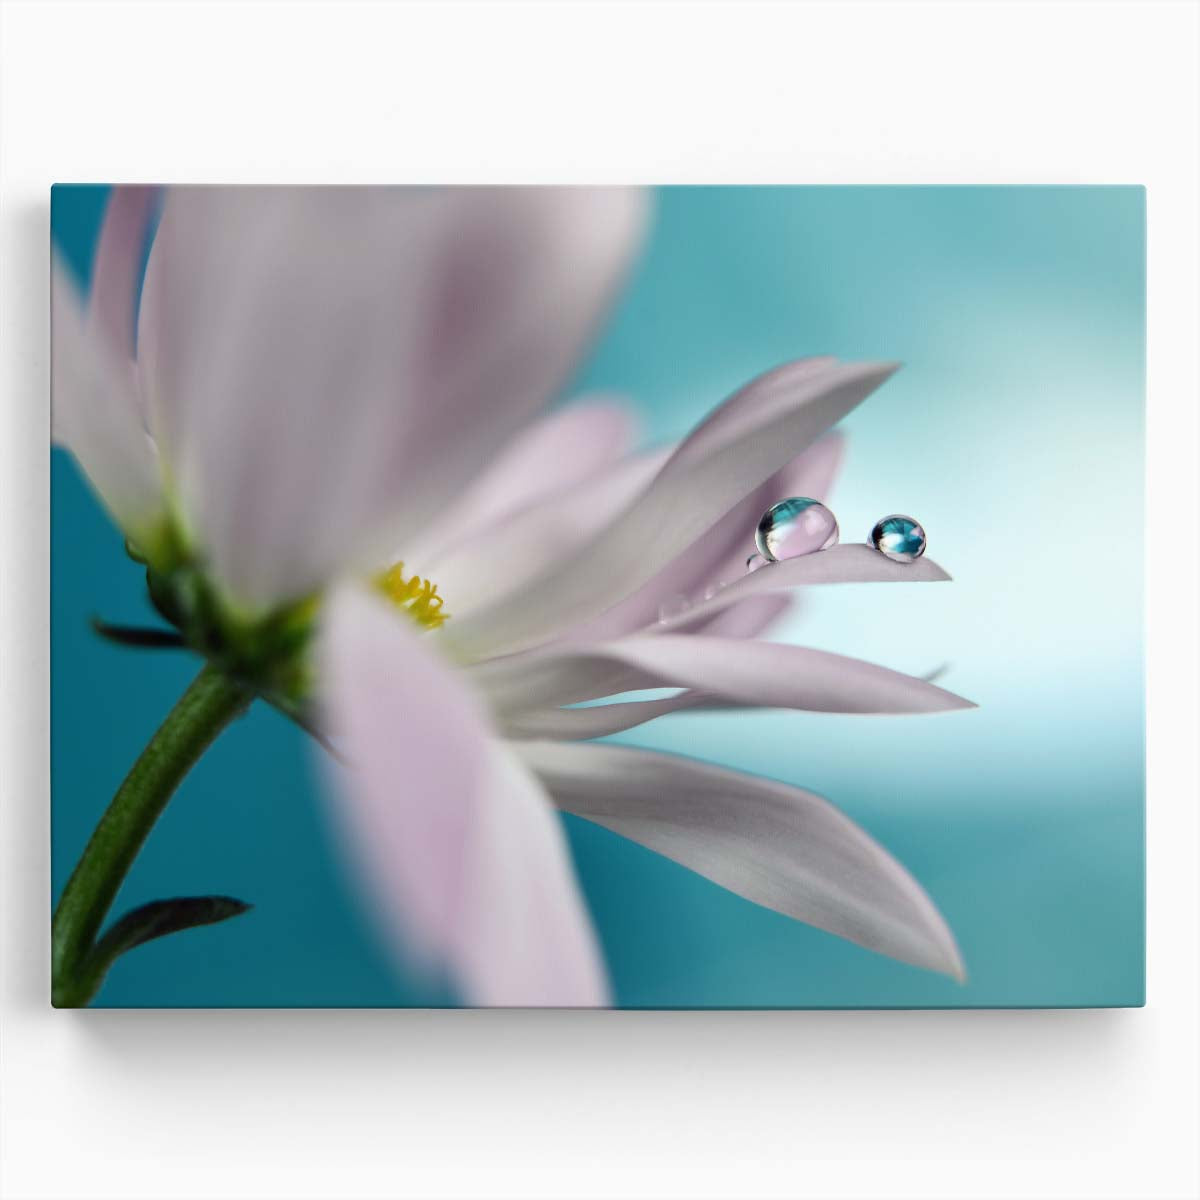 Turquoise Pearl Droplets on Tender Pink Daisy Wall Art by Luxuriance Designs. Made in USA.